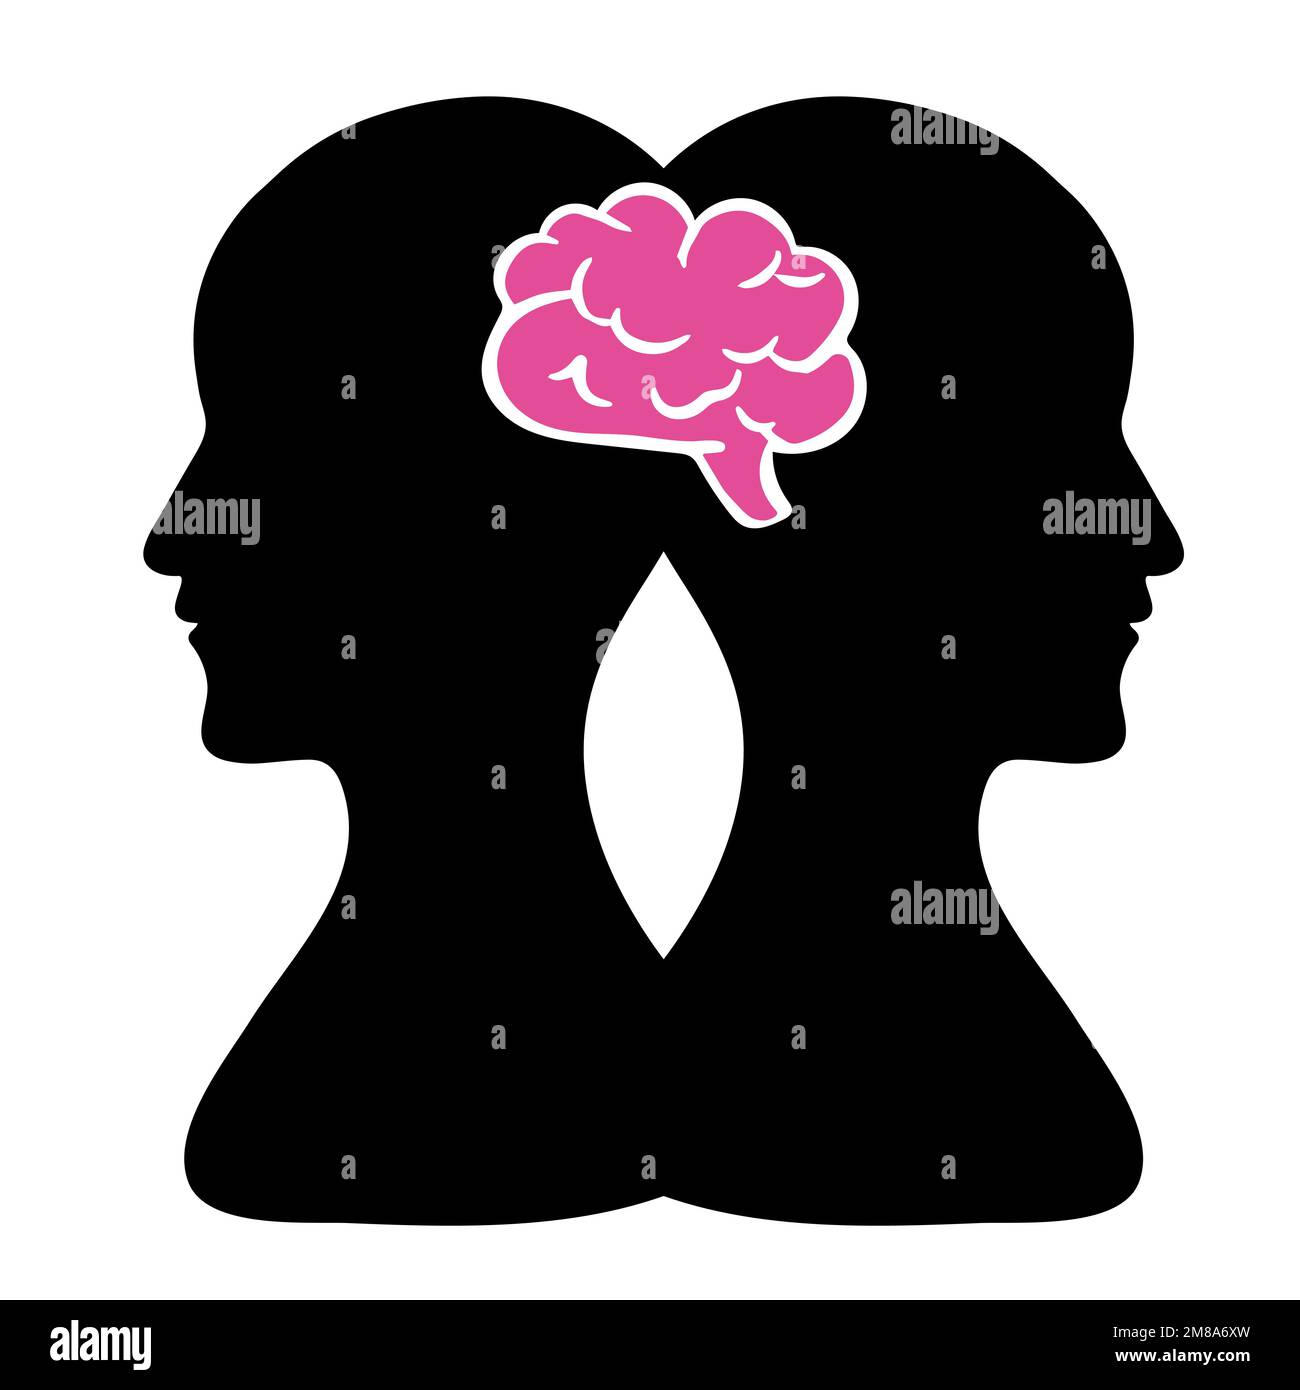 BPD Simple concept. Minimalistic Icon of human head with bipolar disorder or borderline personality disorder. Emotional dualism and Split Personality Stock Vector